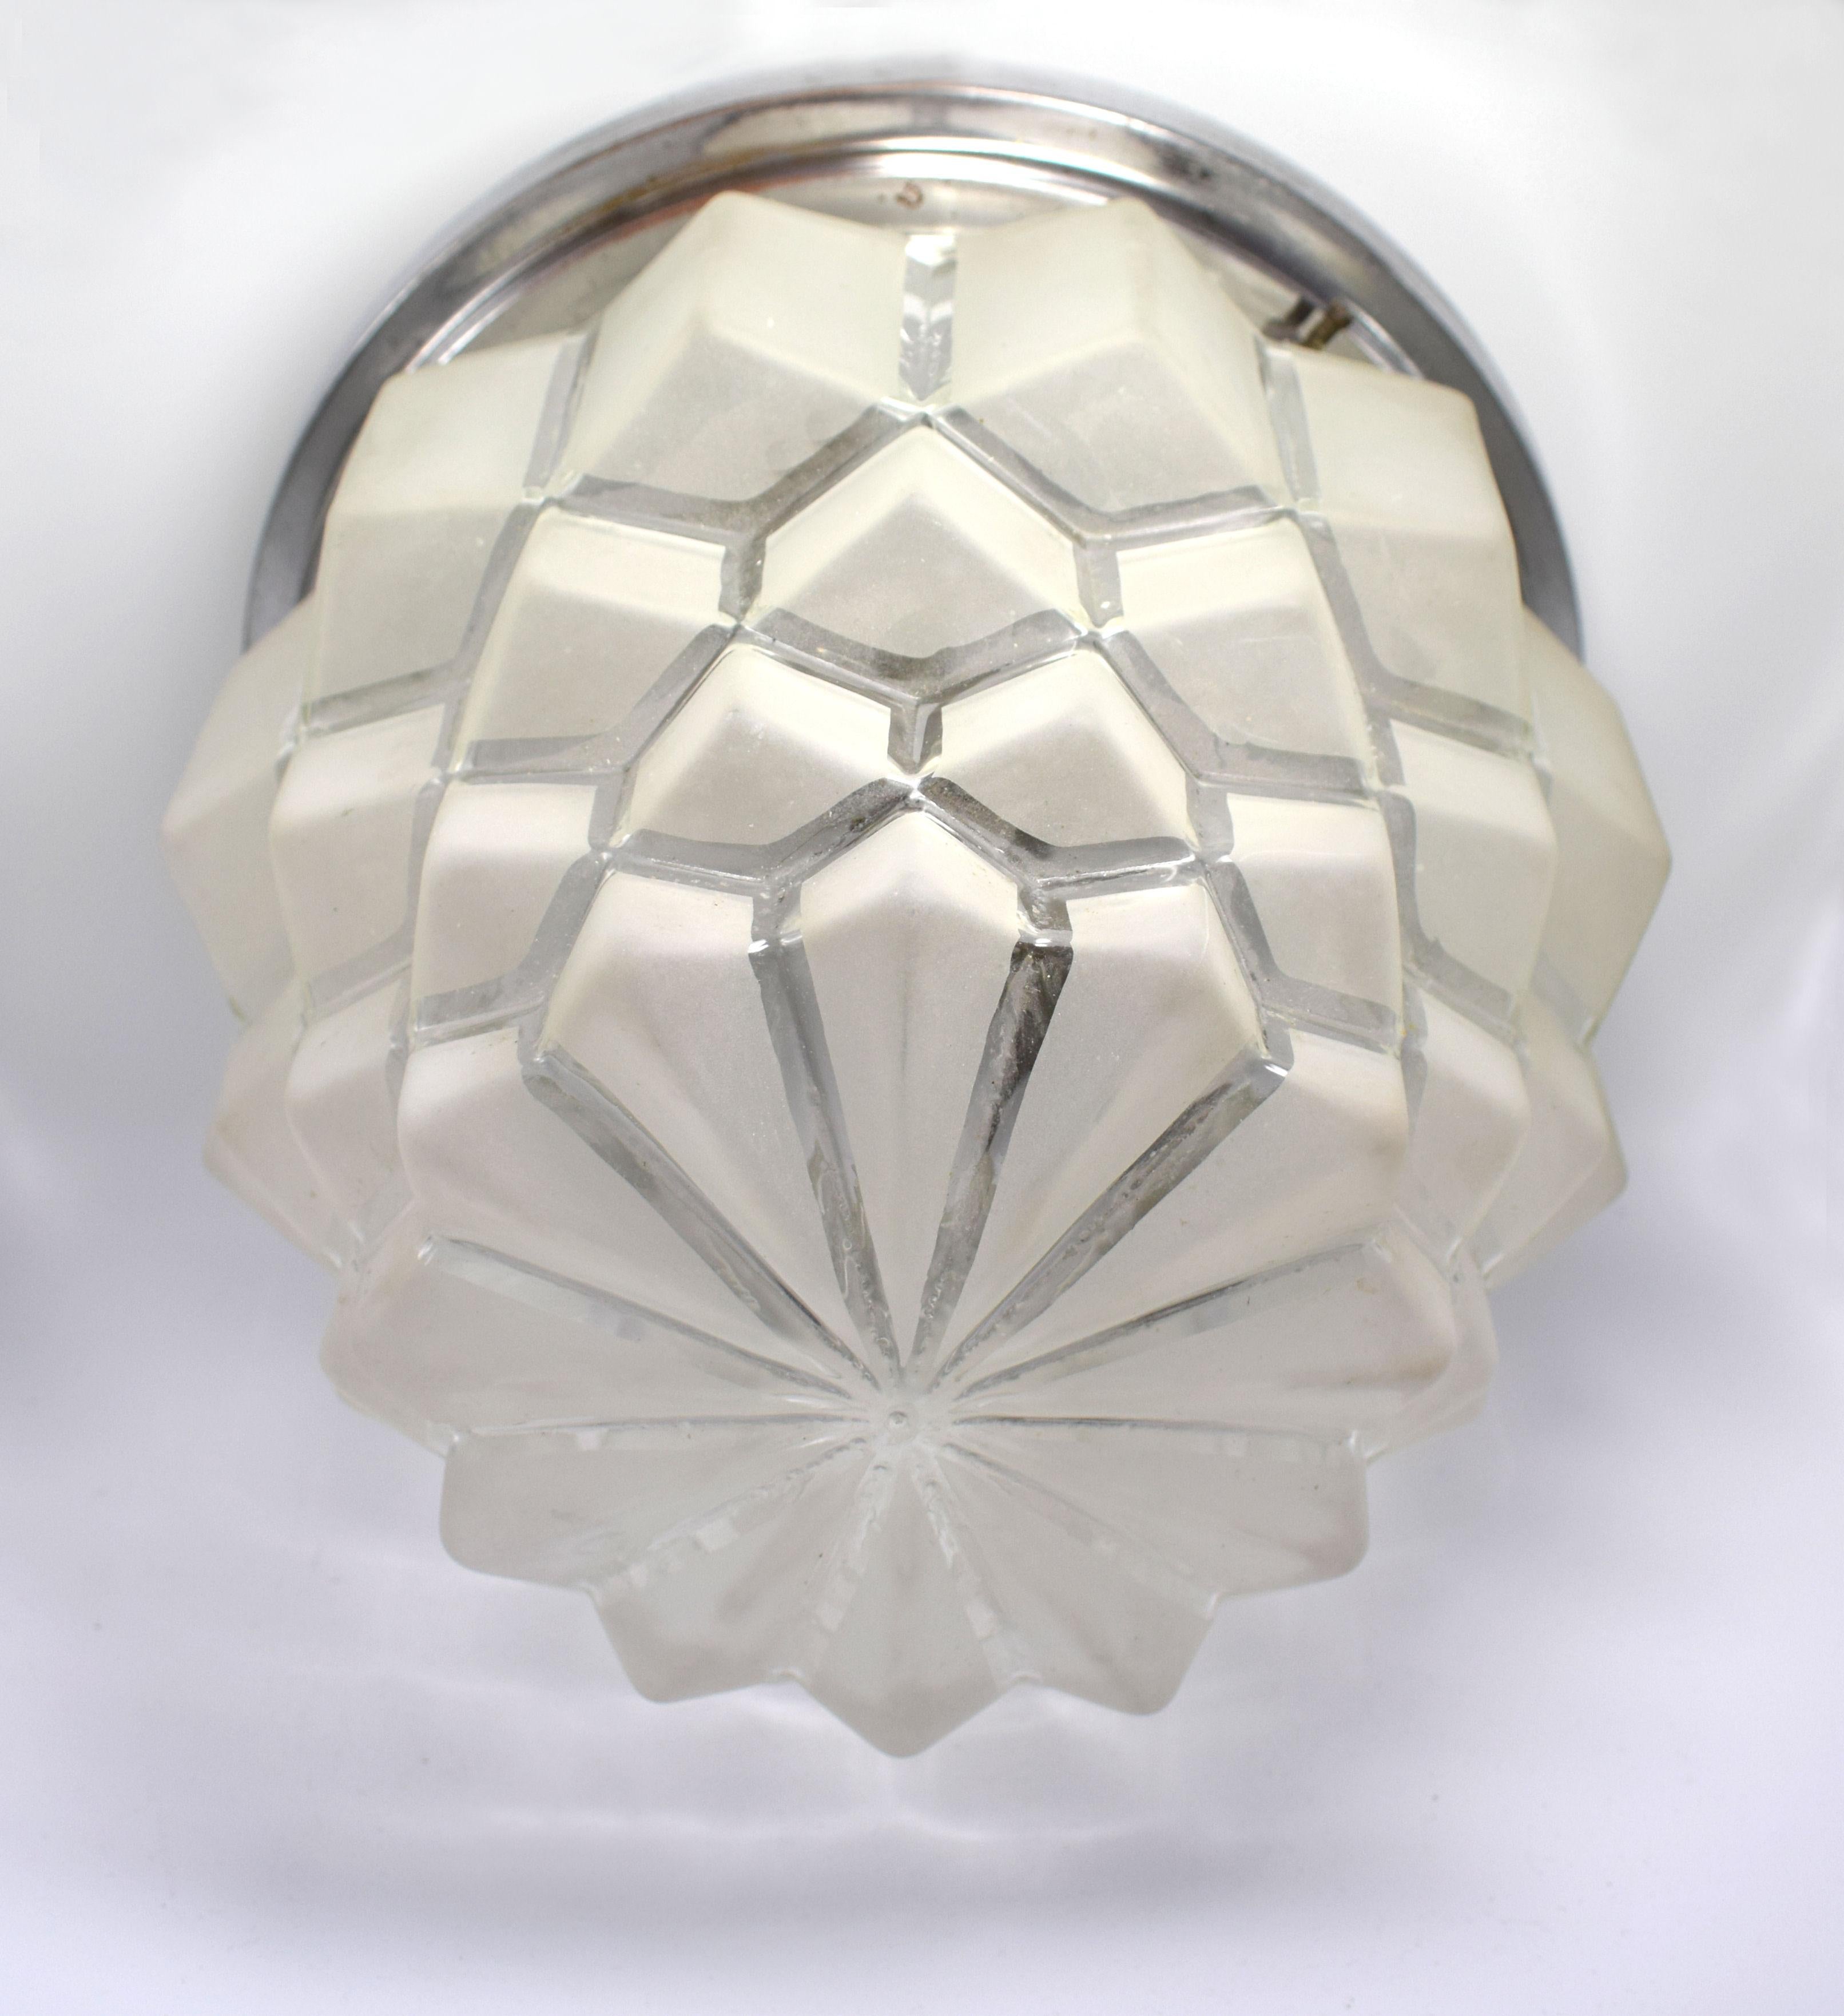 Wonderful opportunity to acquire a substantially sized 1930s Art Deco French ceiling light which is a half way house between skyscraper and a pineapple! Frosted glass segmented jutting out spikes of glass which are tiered like a wedding cake form